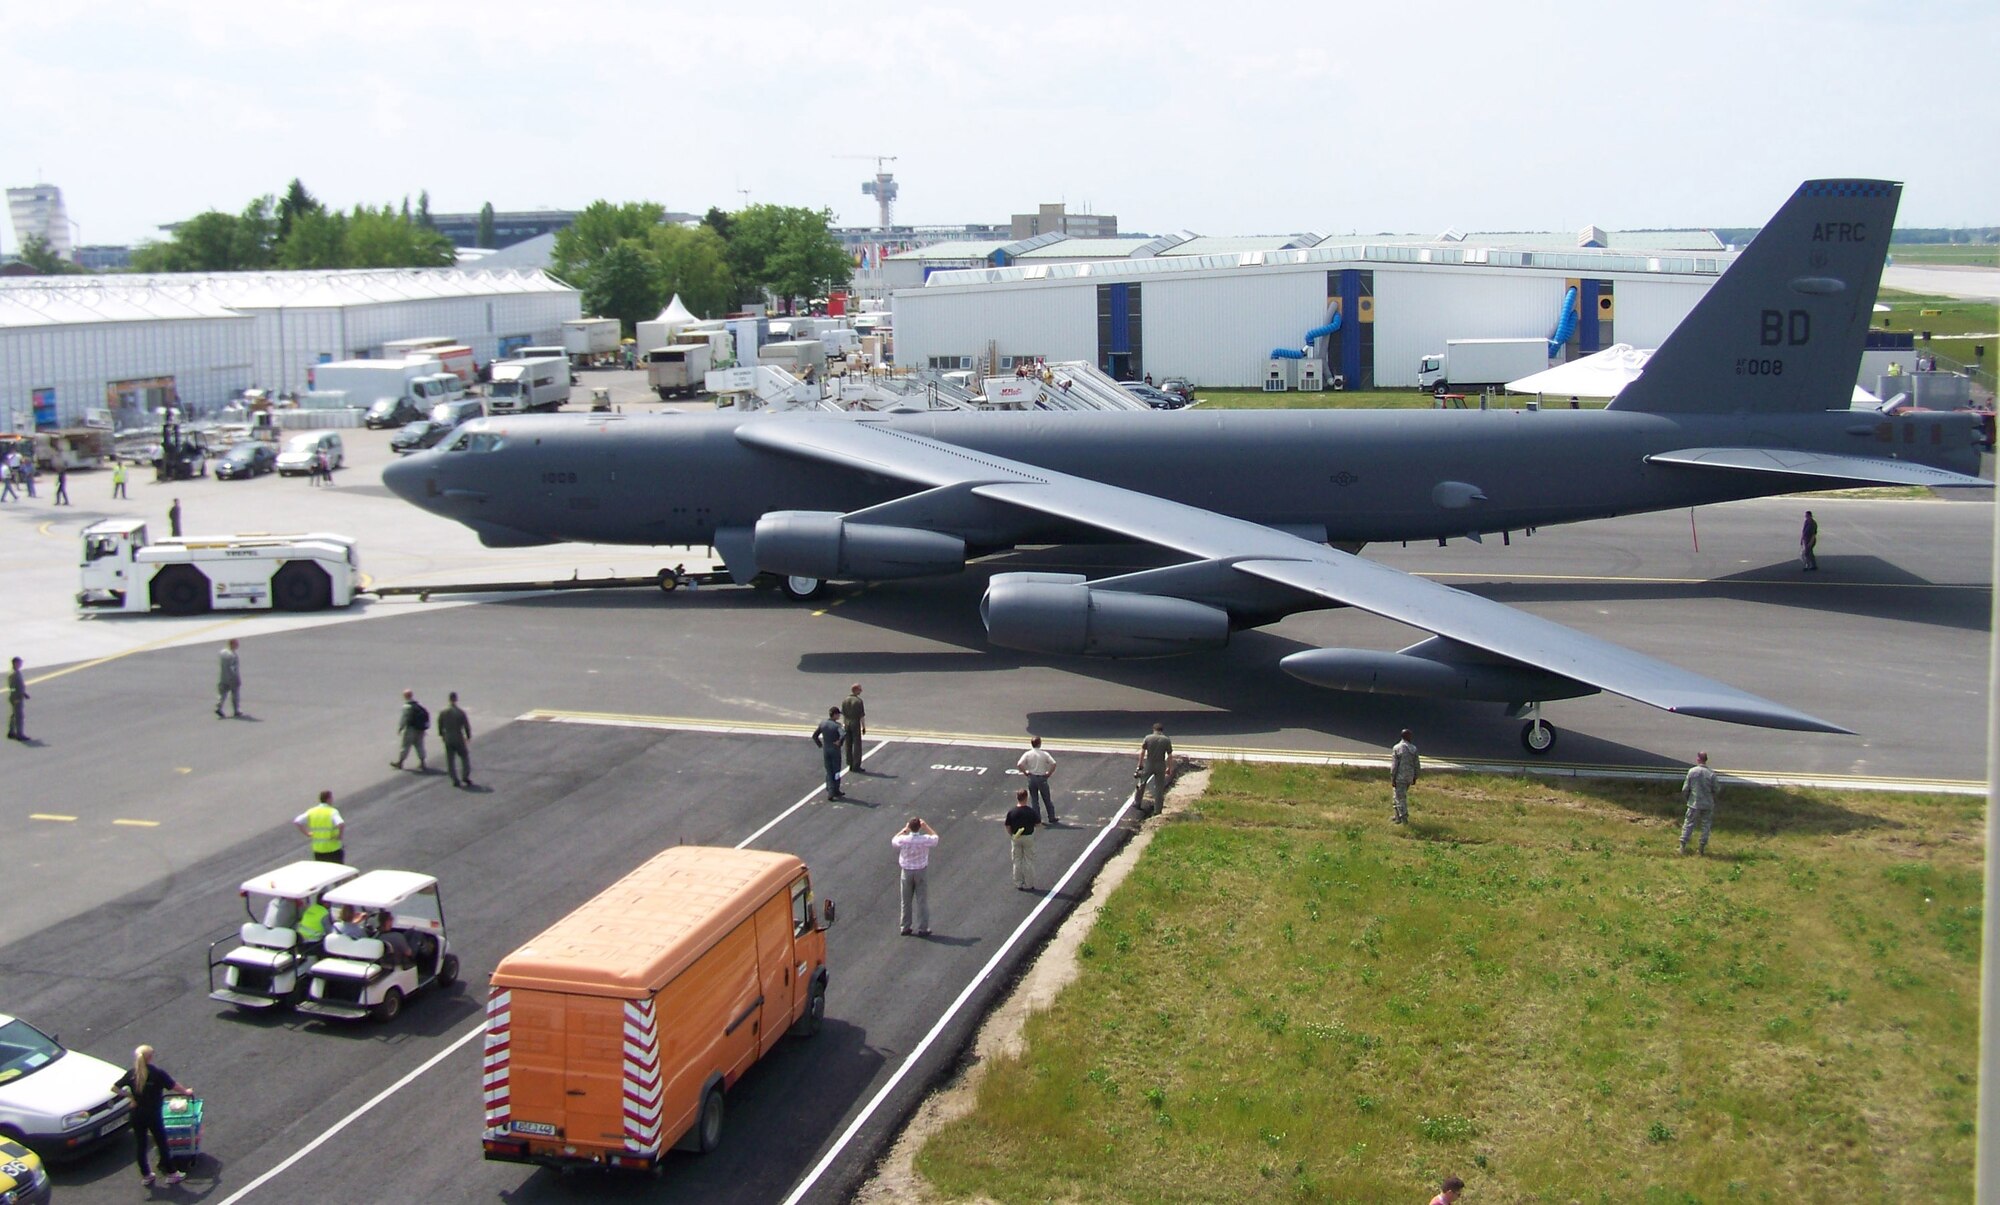 A B-52H Stratofortress from the 93rd Bomb Squadron, Barksdale Air Force Base, La., gets a tug through the parking area at the Berlin Air Show. This is the first Air Force Reserve Command unit has one of its bombers taking part in the international event, which runs June 8-13, 2010. (Courtesy photo)

